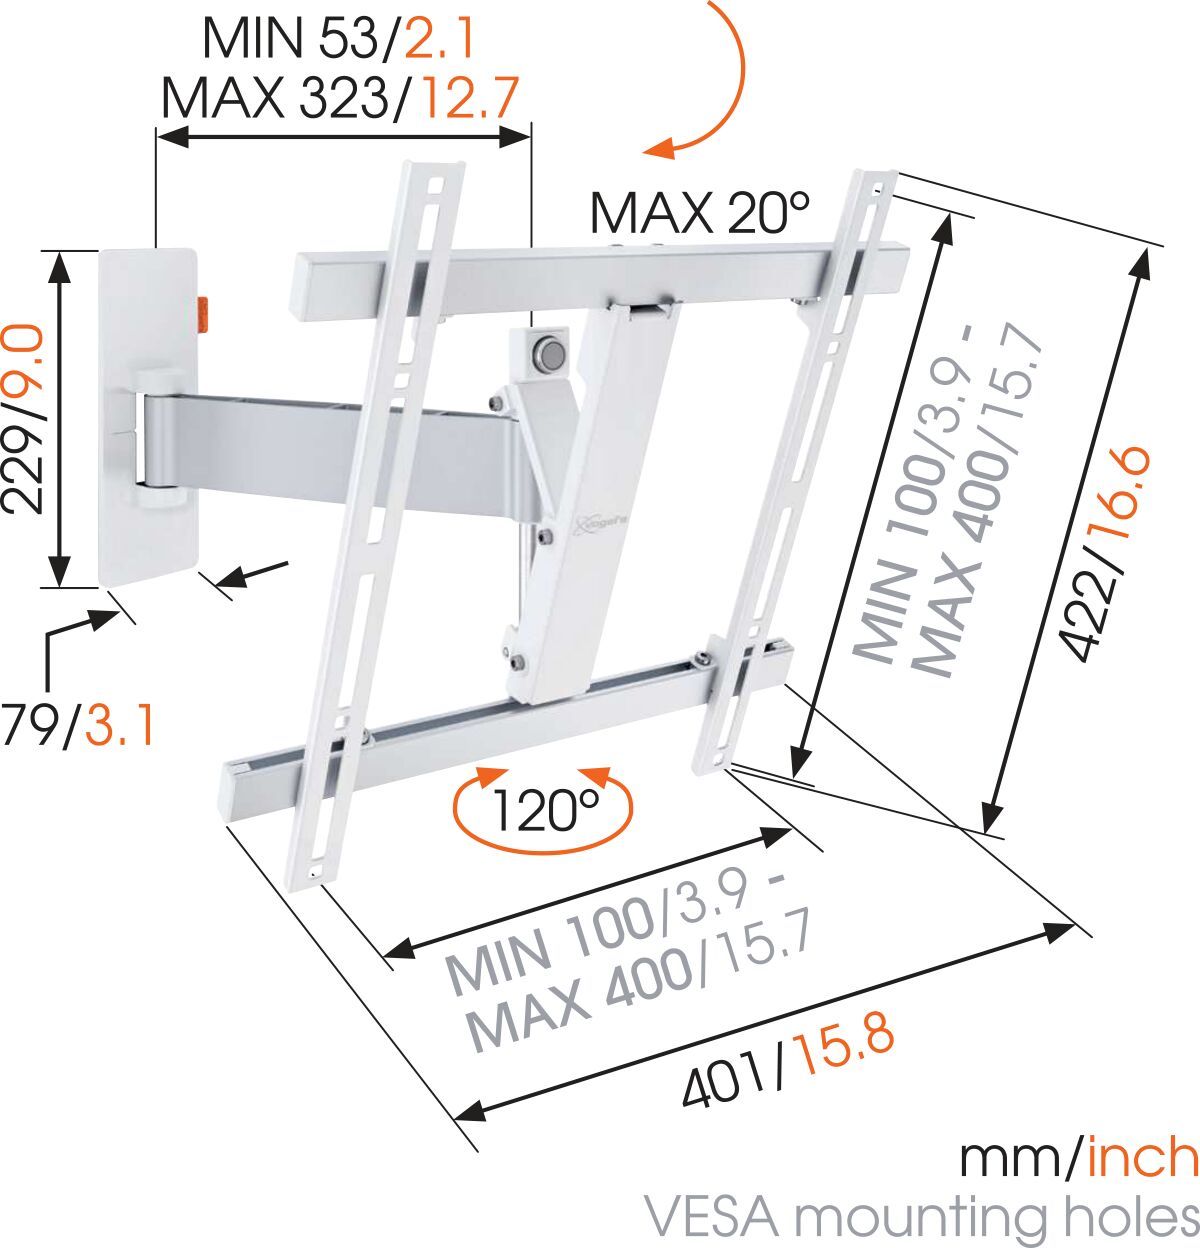 Vogel's WALL 2225 Full-Motion TV Wall Mount (white) - Suitable for 32 up to 55 inch TVs - Motion (up to 120°) - Tilt up to 20° - Dimensions